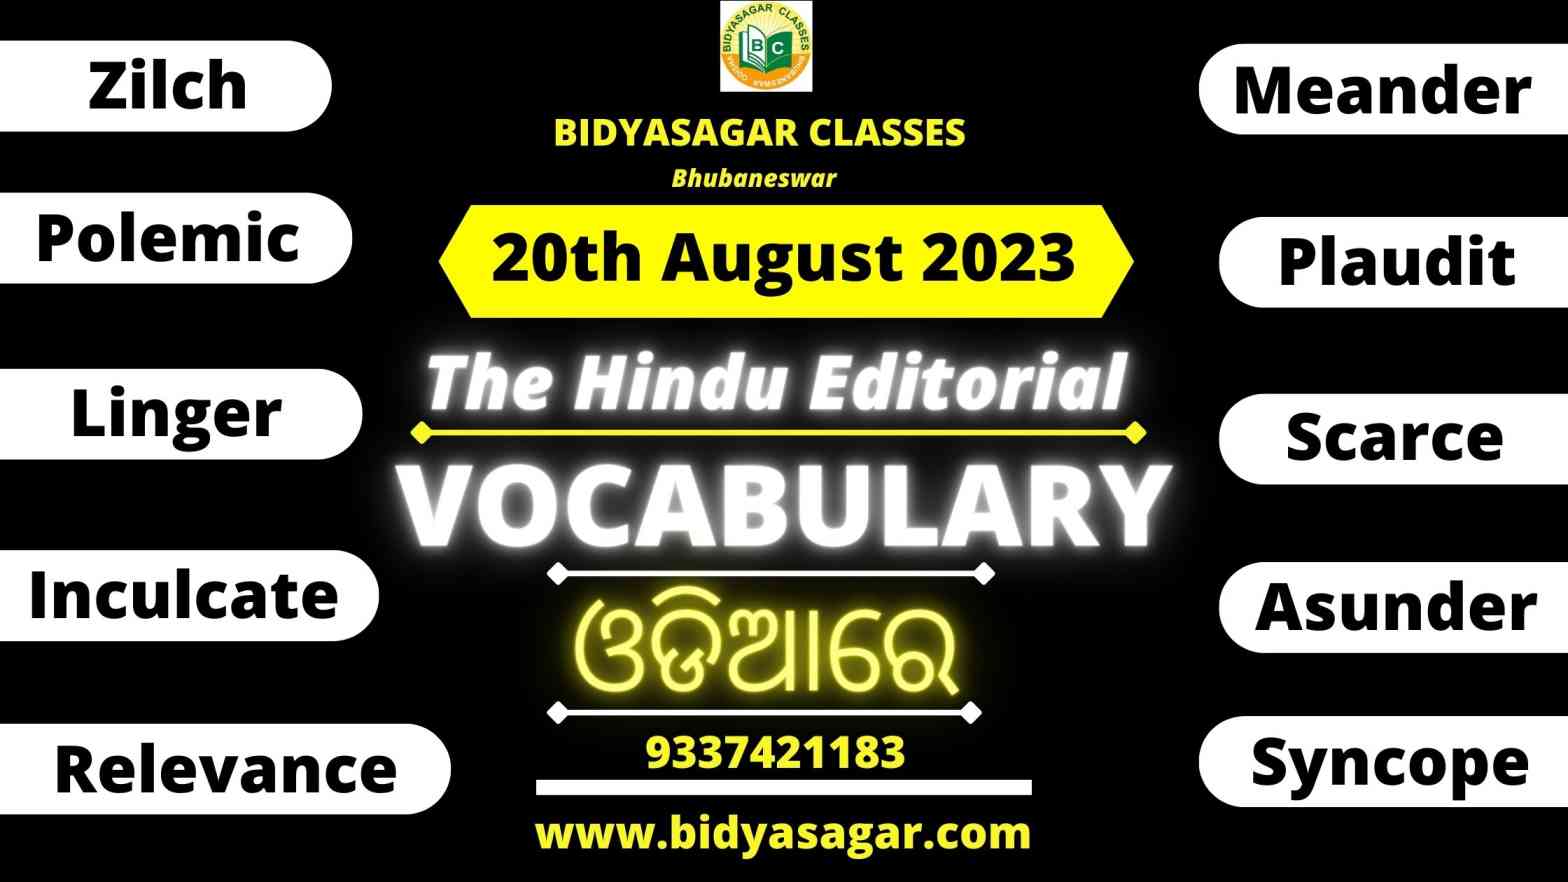 The Hindu Editorial Vocabulary of 20th August 2023